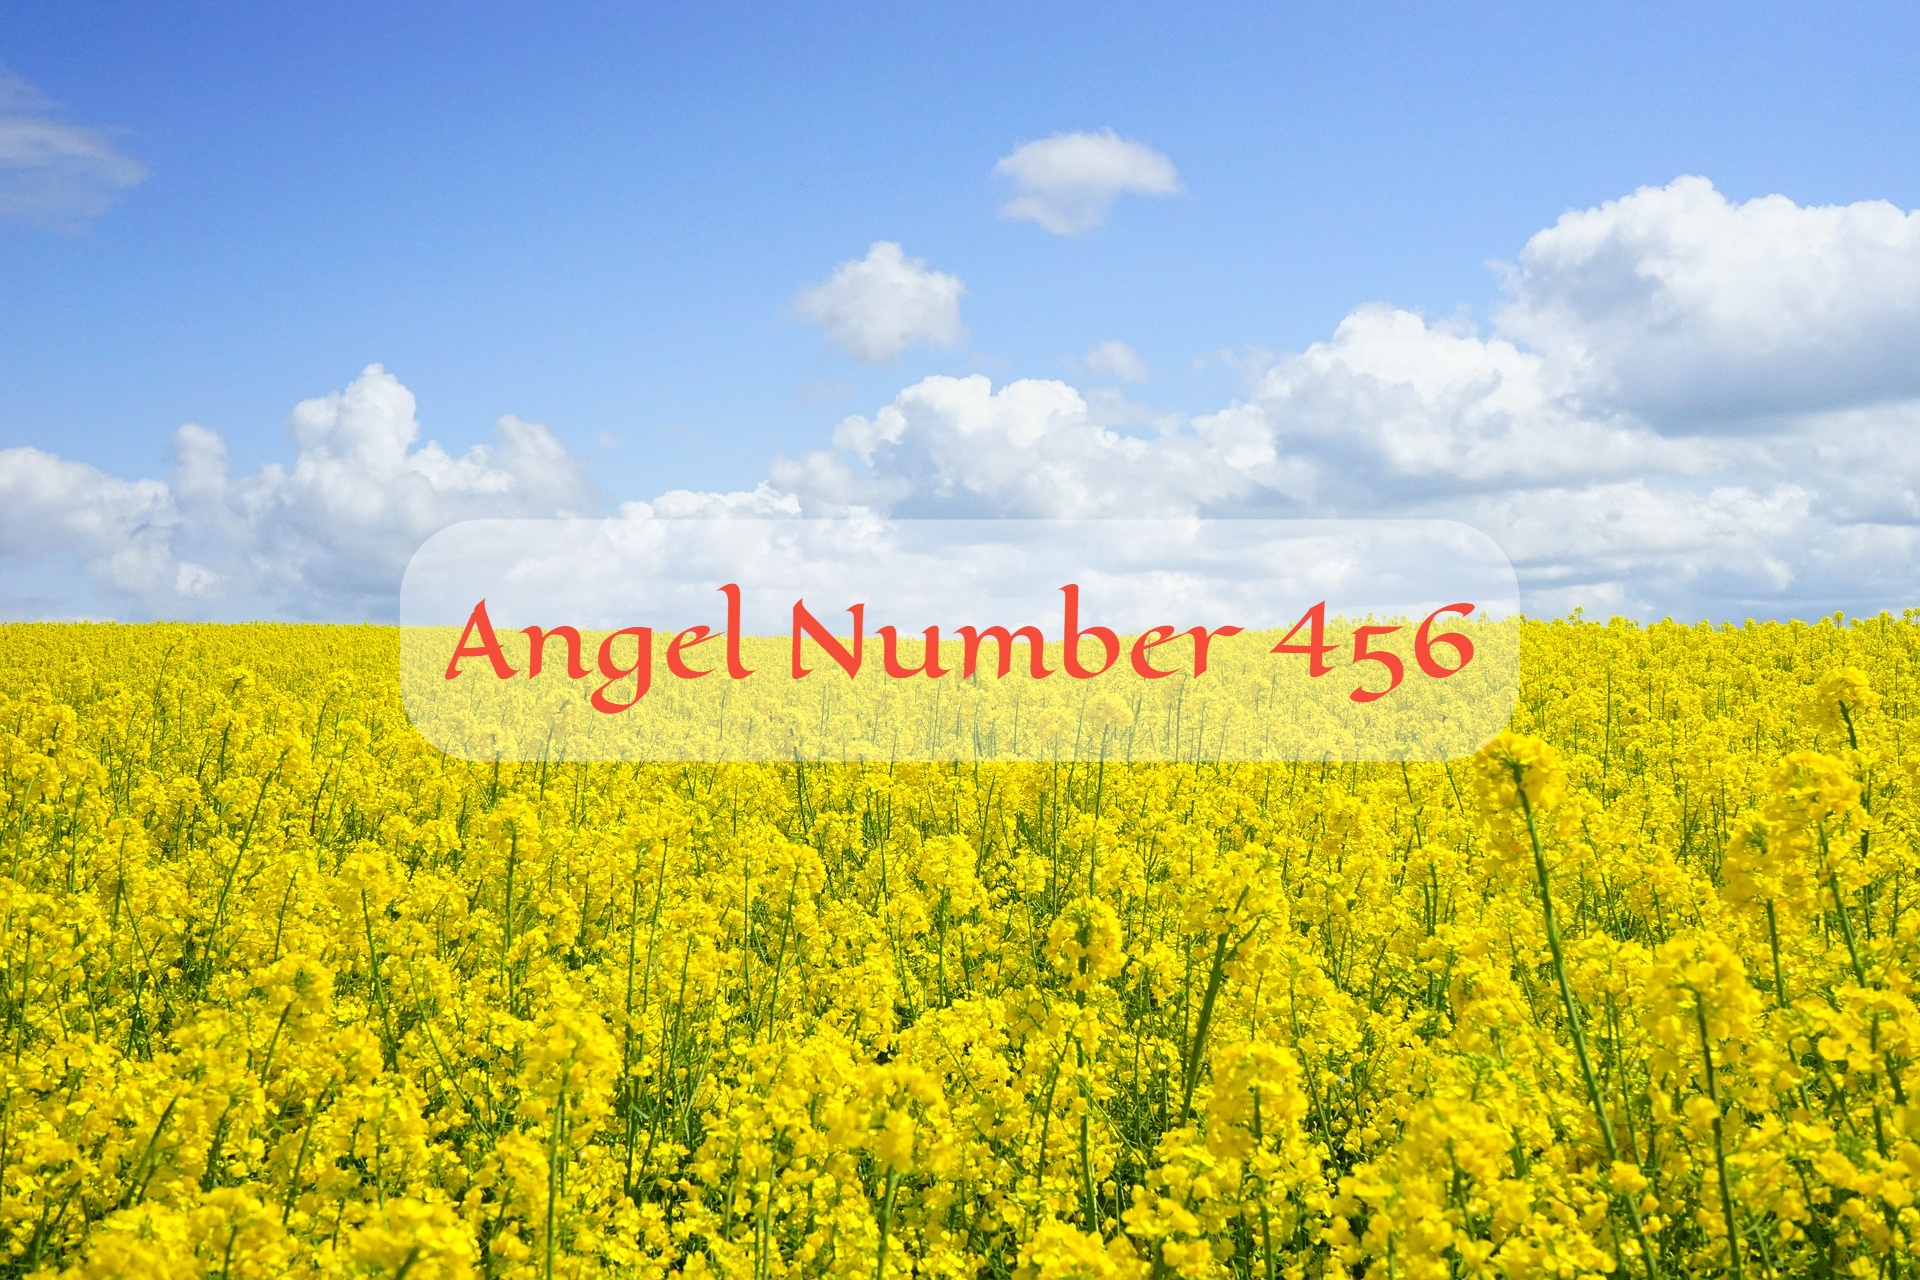 Angel Number 456 Meaning - The Symbol For Forward Motion